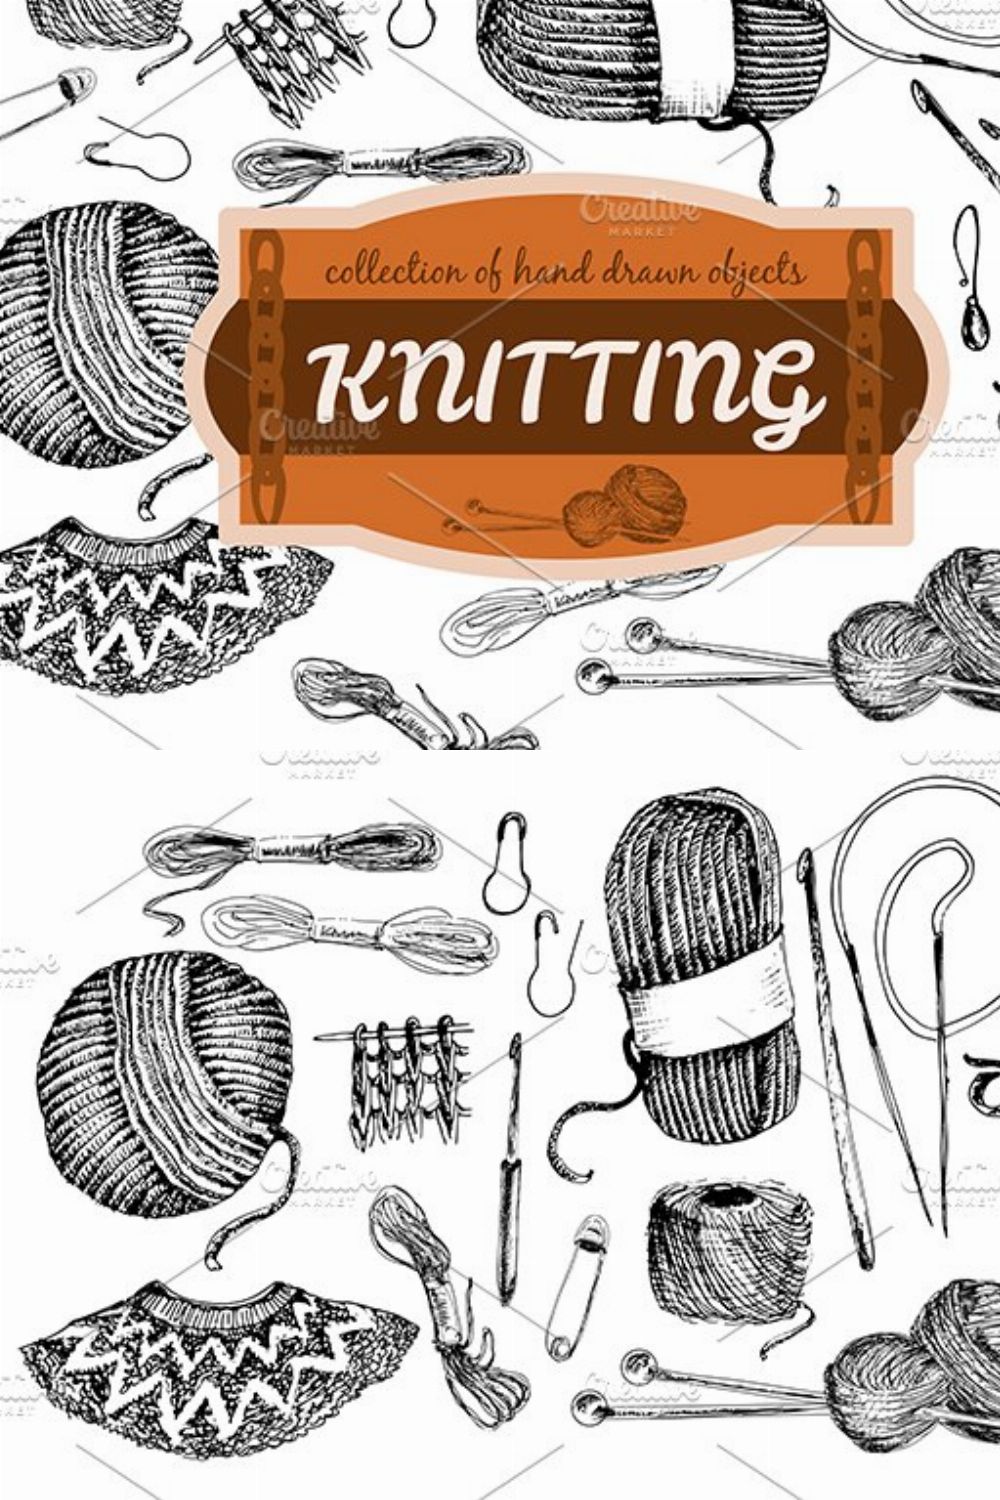 Knitting tools and accessories pinterest preview image.